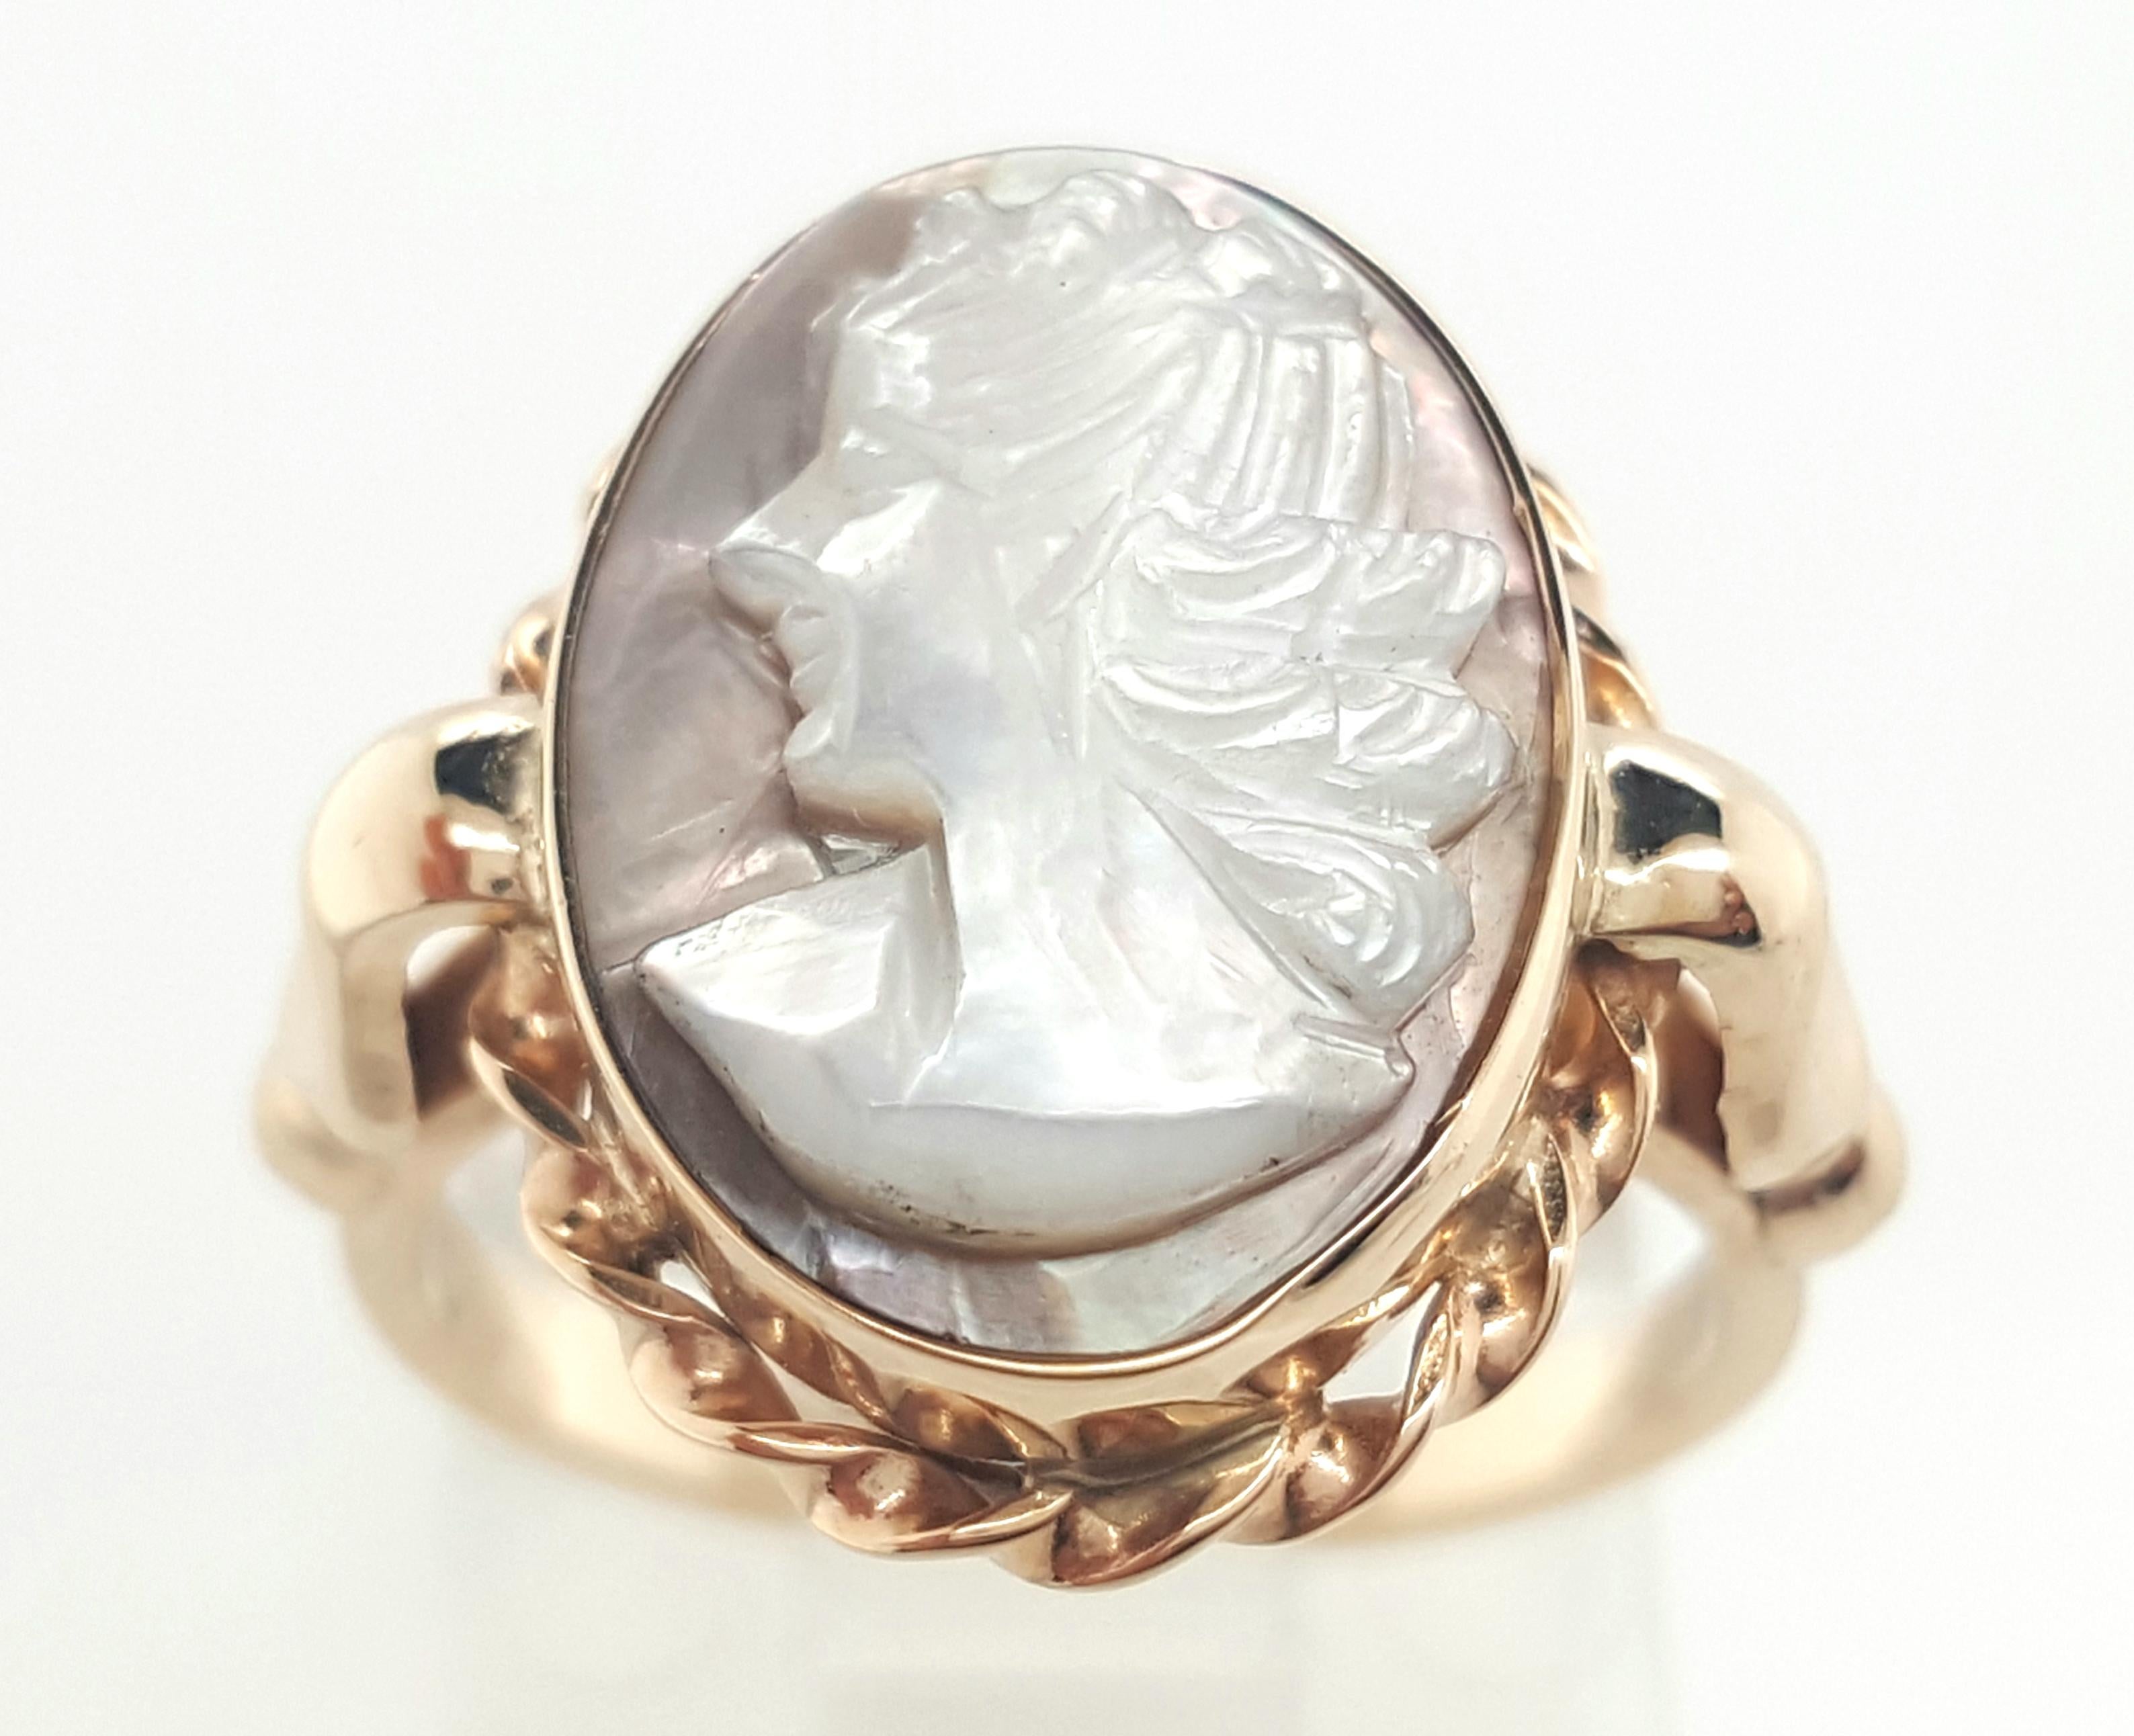 Vintage Art Deco 10 Karat Yellow Gold Carved Shell Cameo Woman Ring 4